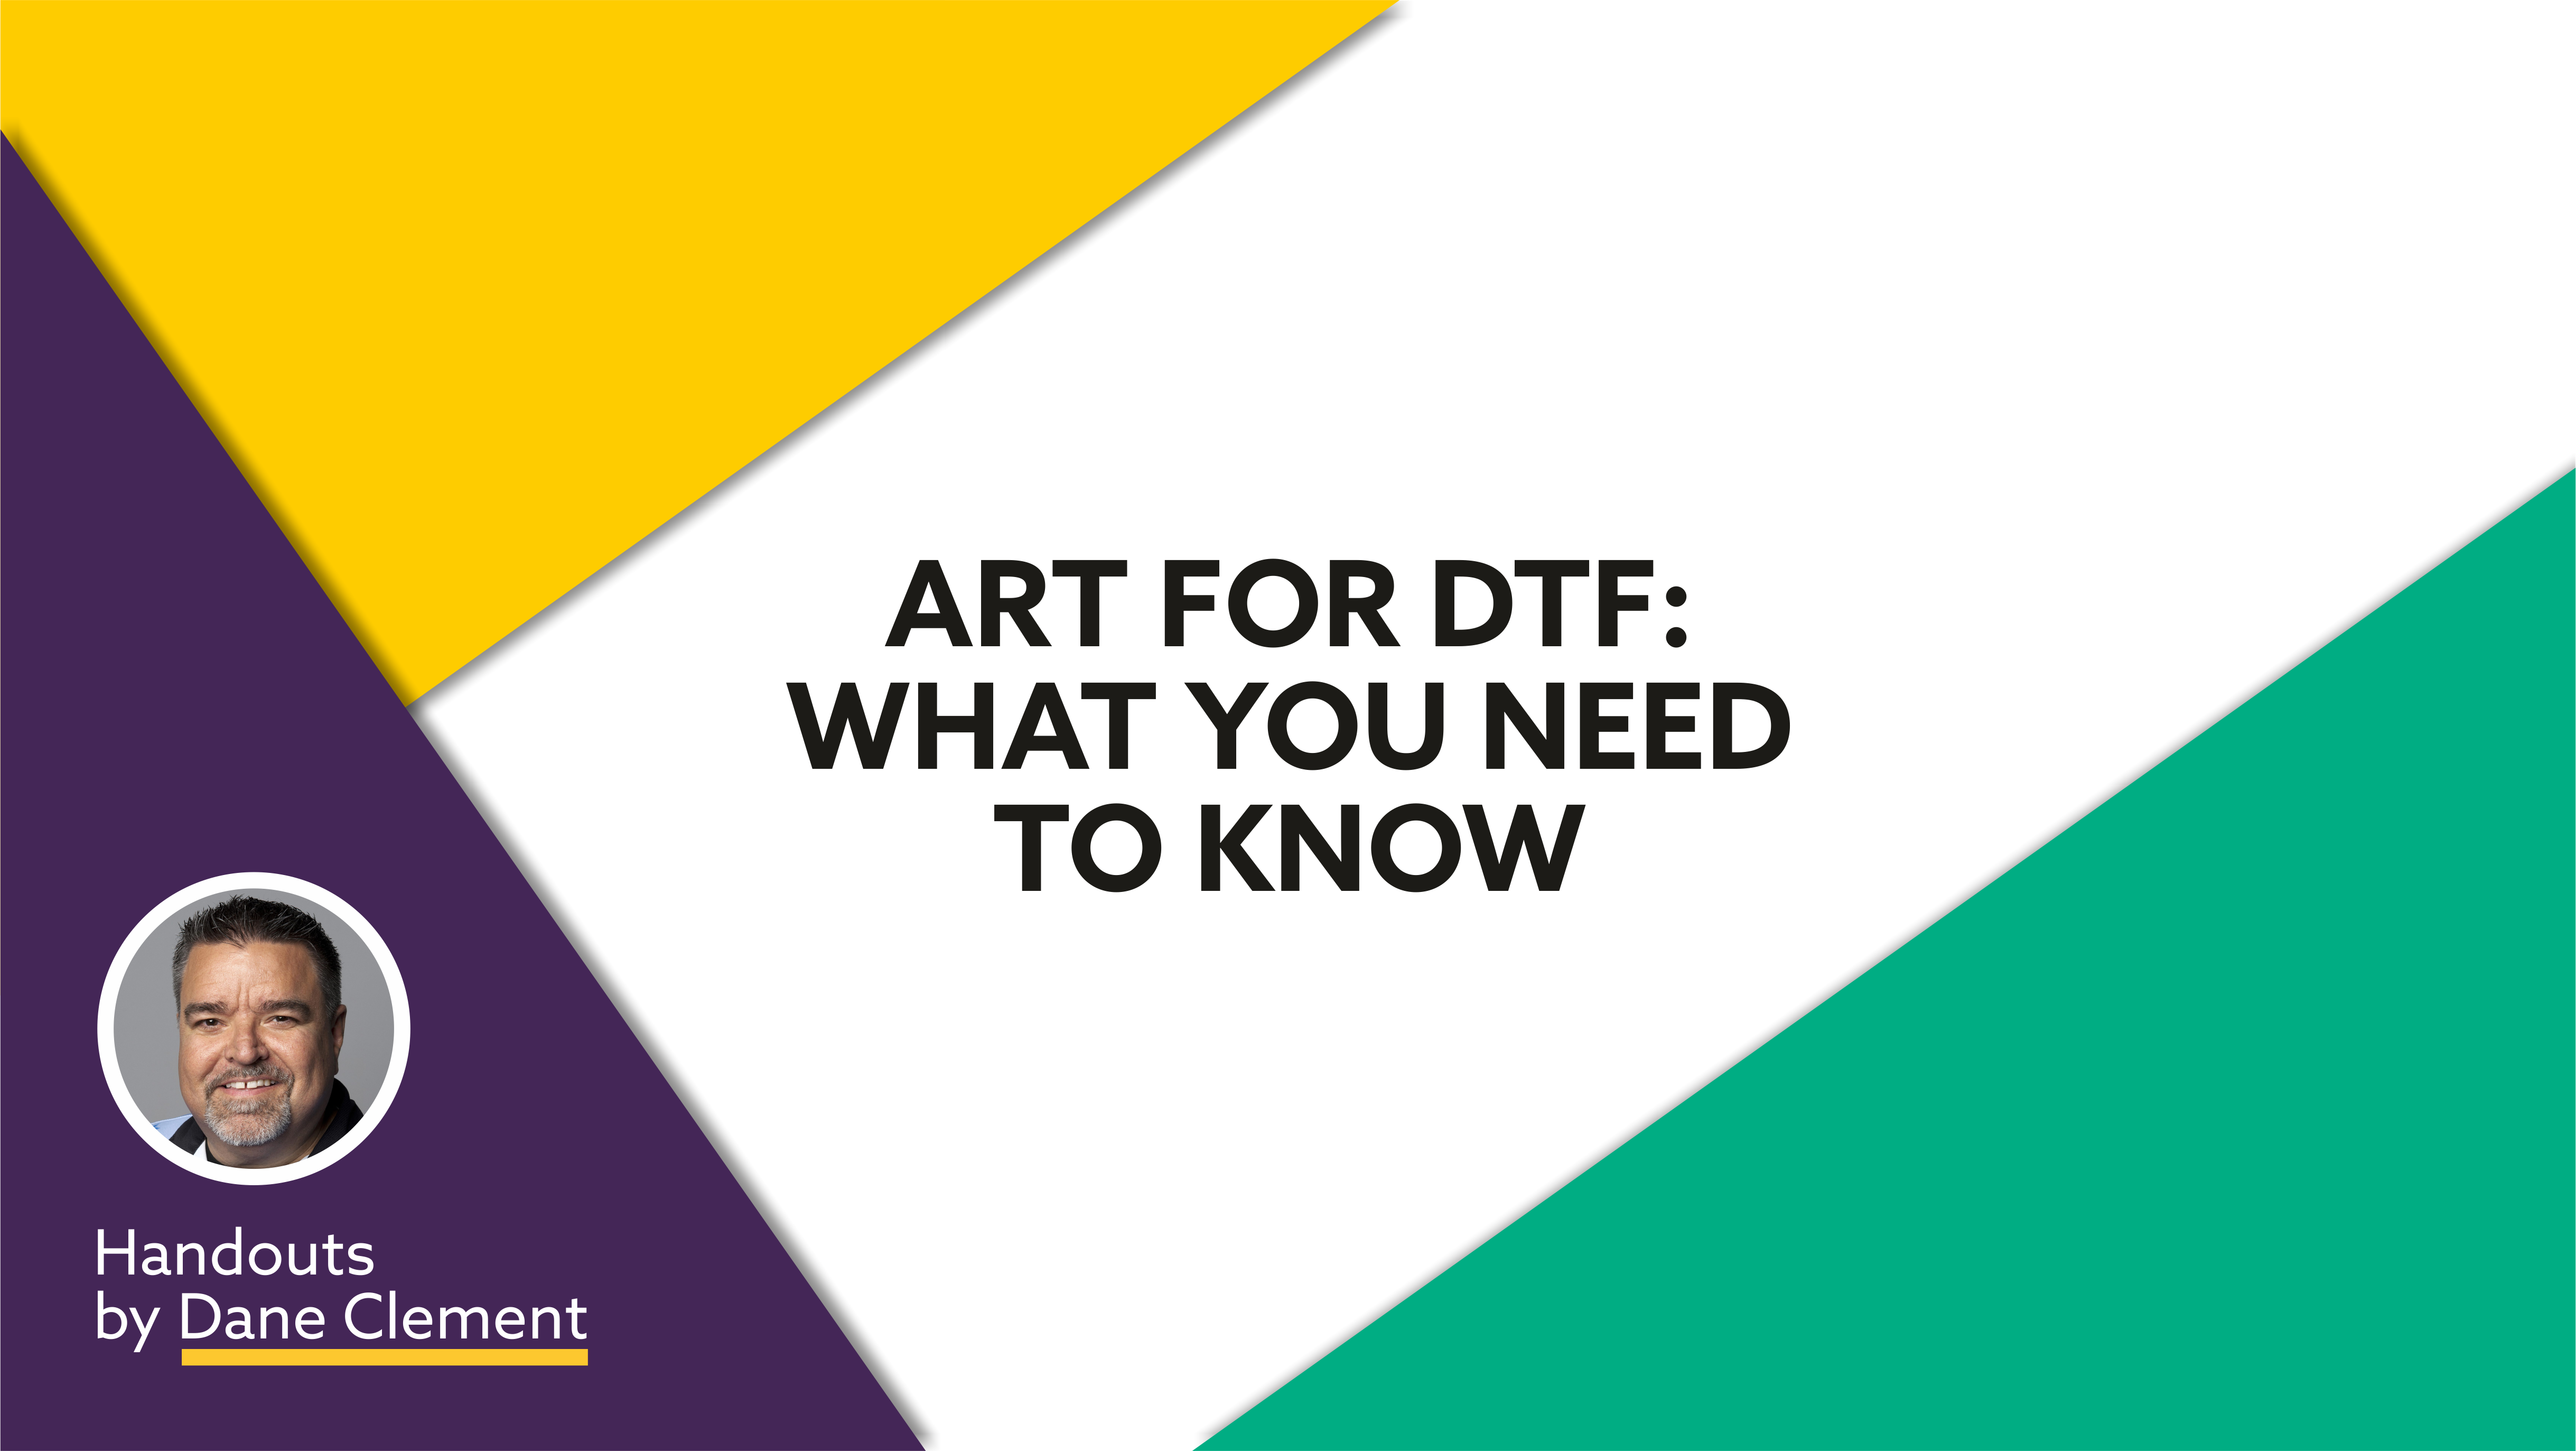 Artwork for DTF: What you need to know